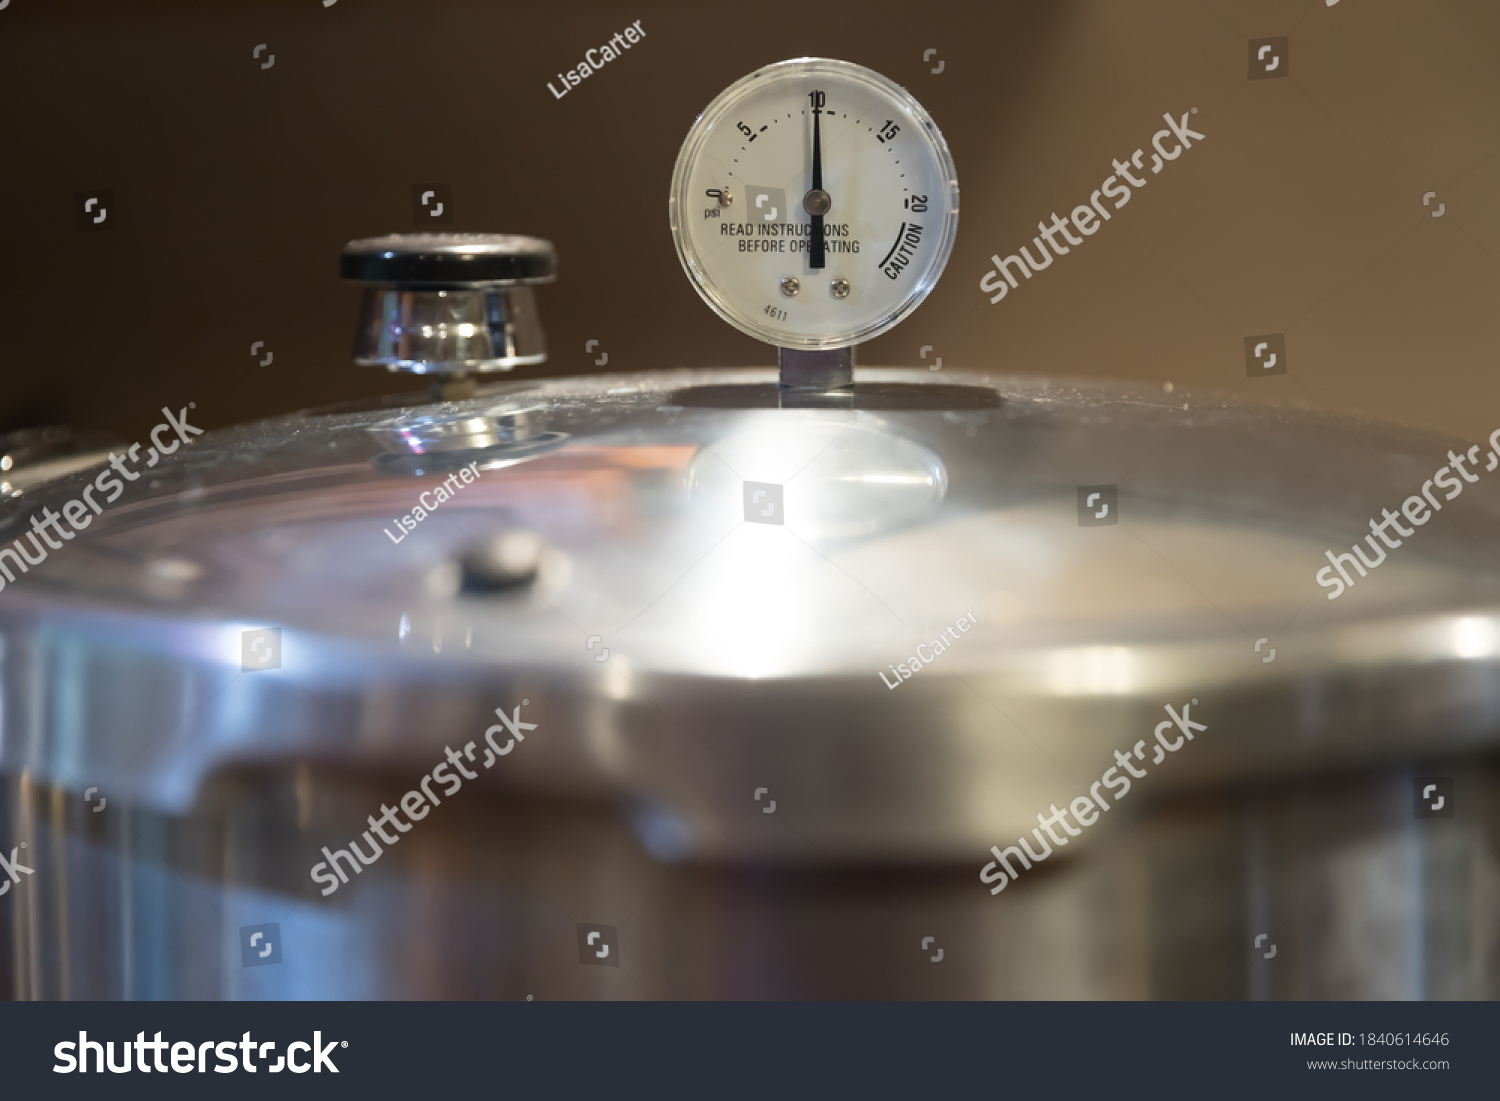 A stainless steel pressure cooker lid with pressure gauge reading 10 pounds of pressure. Pressure canners are used to can vegetables from the garden. #1840614646